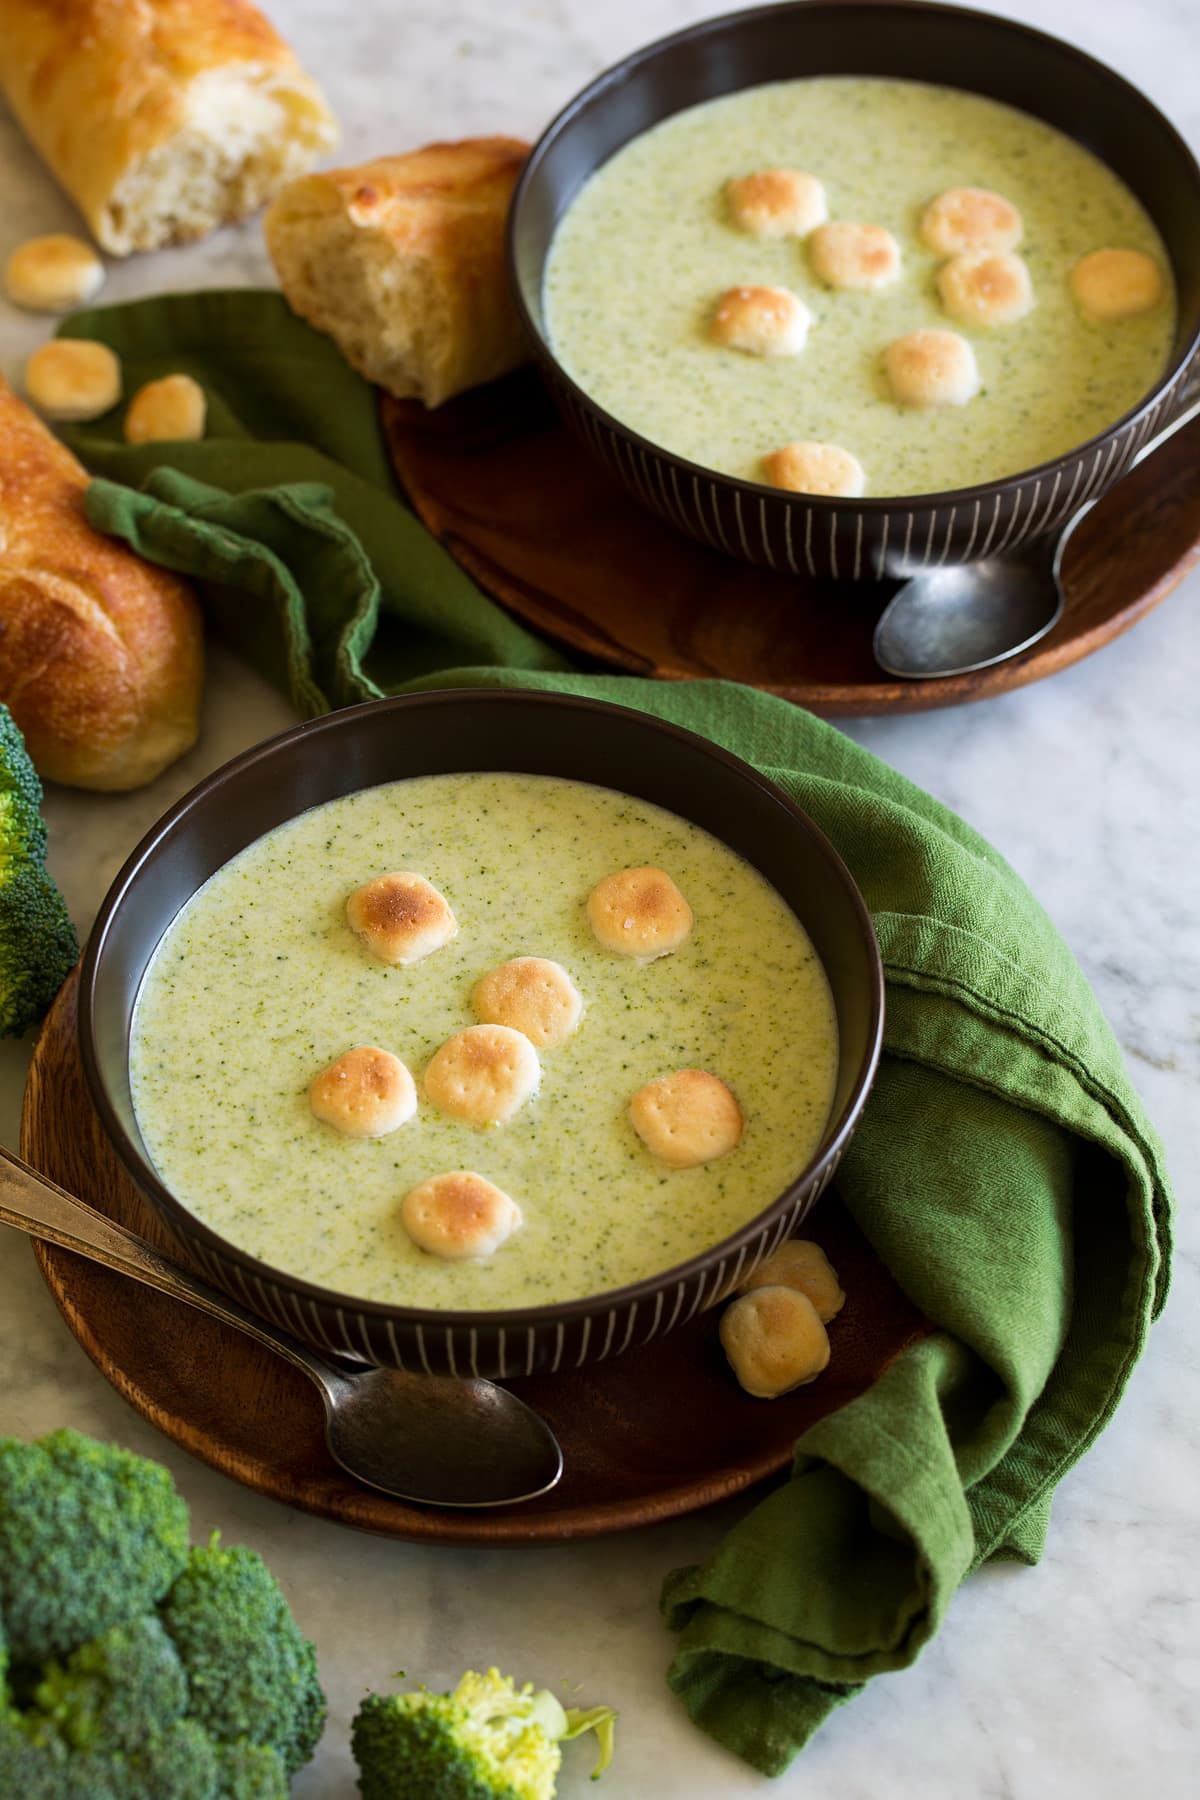 Cream of broccoli soup in brown serving bowls with a crackers atop it. A green cloth is shown to the side and baguette bread as a serving suggestion.